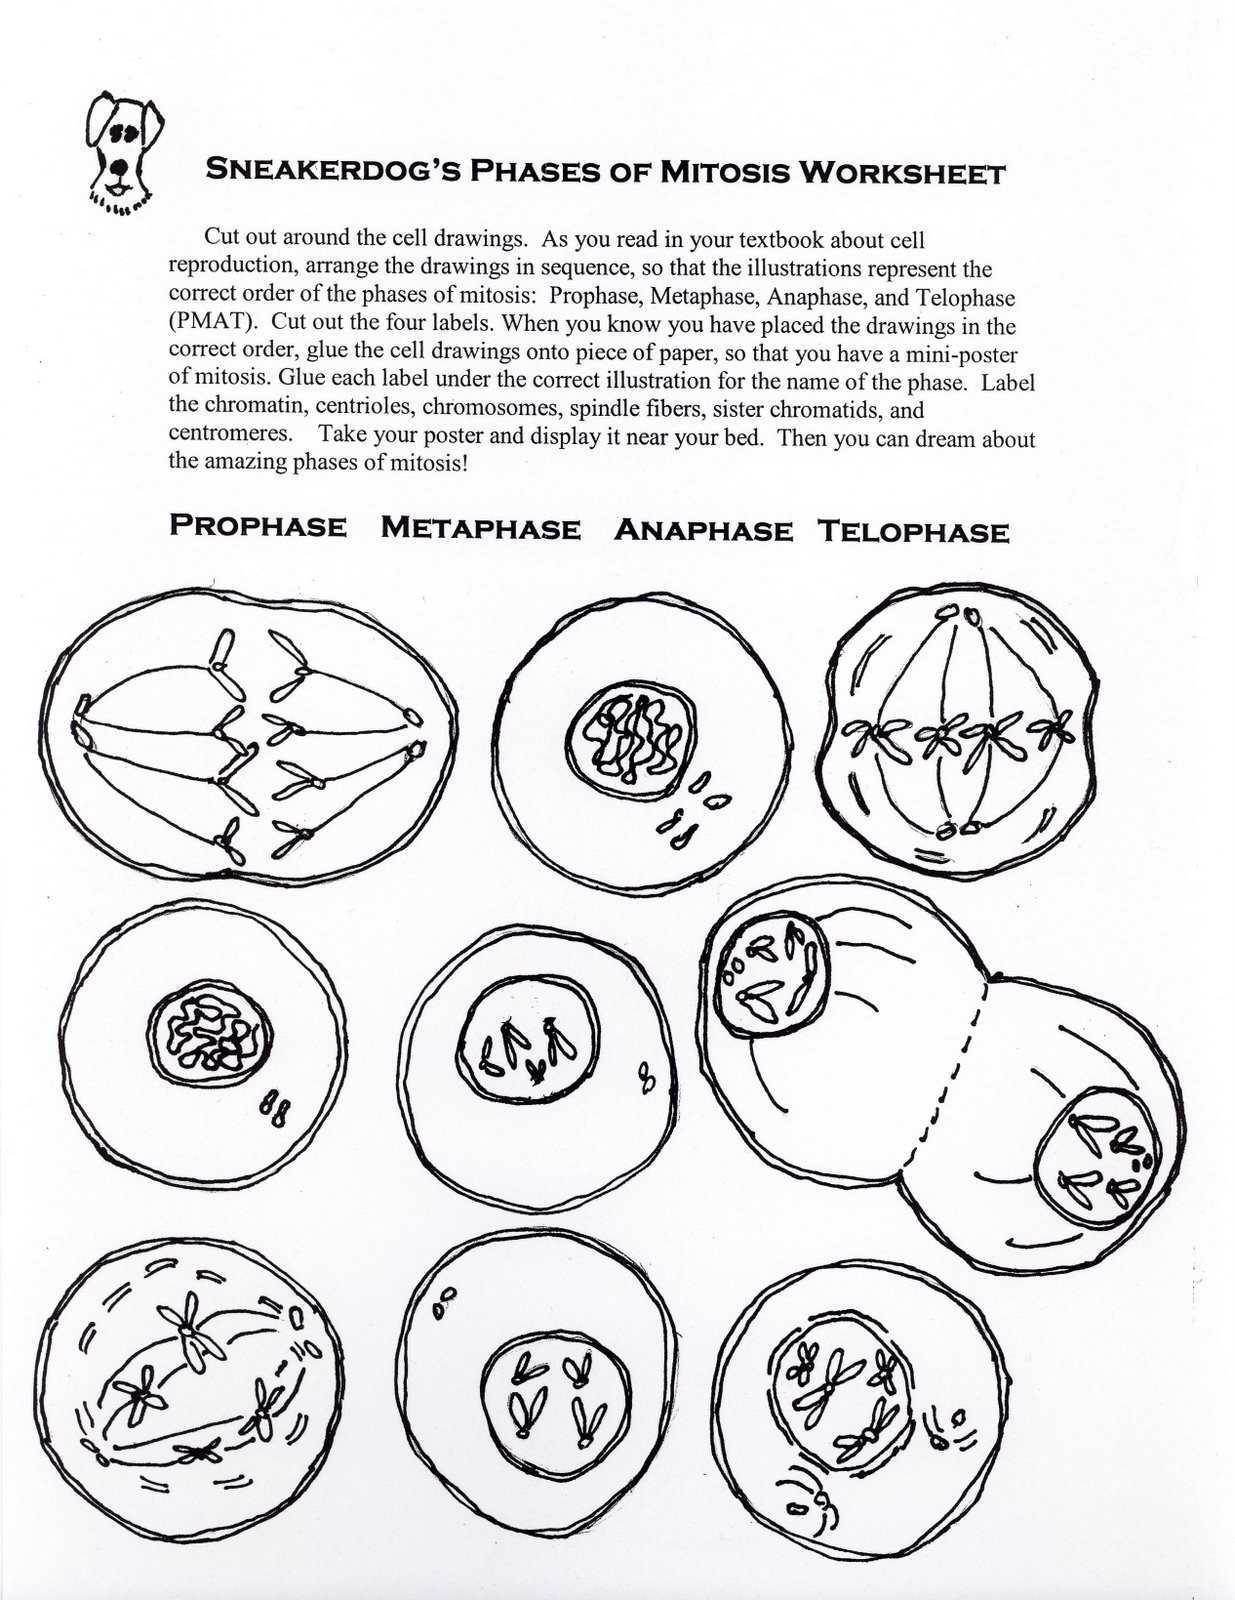 The Cell Cycle Coloring Worksheet Answers together with the Cell Cycle Coloring Worksheet Answers Fresh Cell Division and